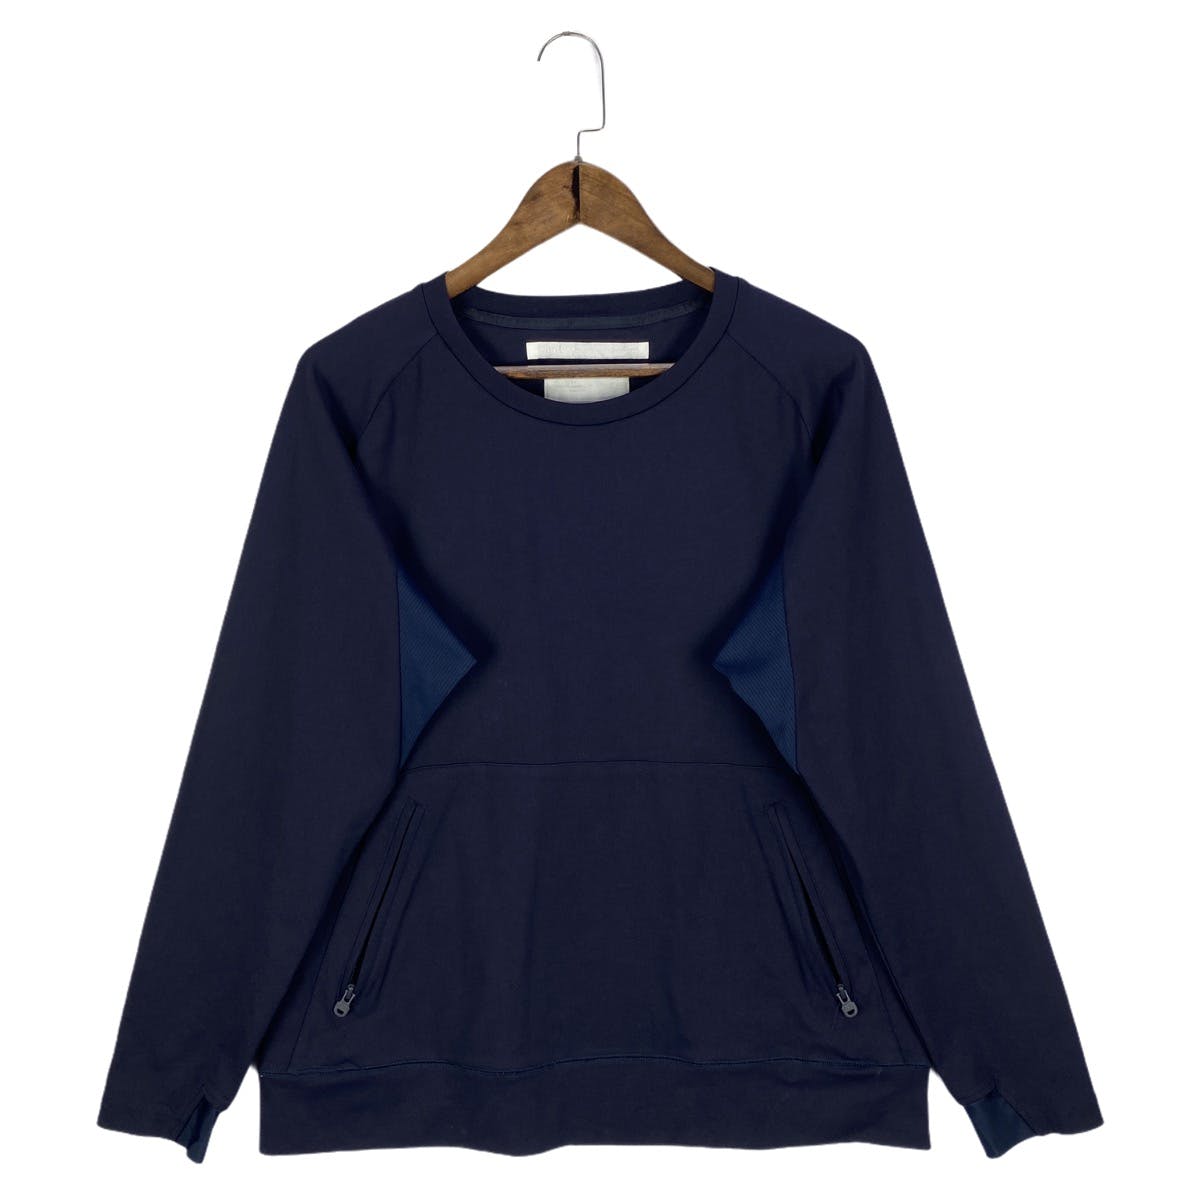 White Mountaineering SS 2016 Collection Sweatshirt - 2